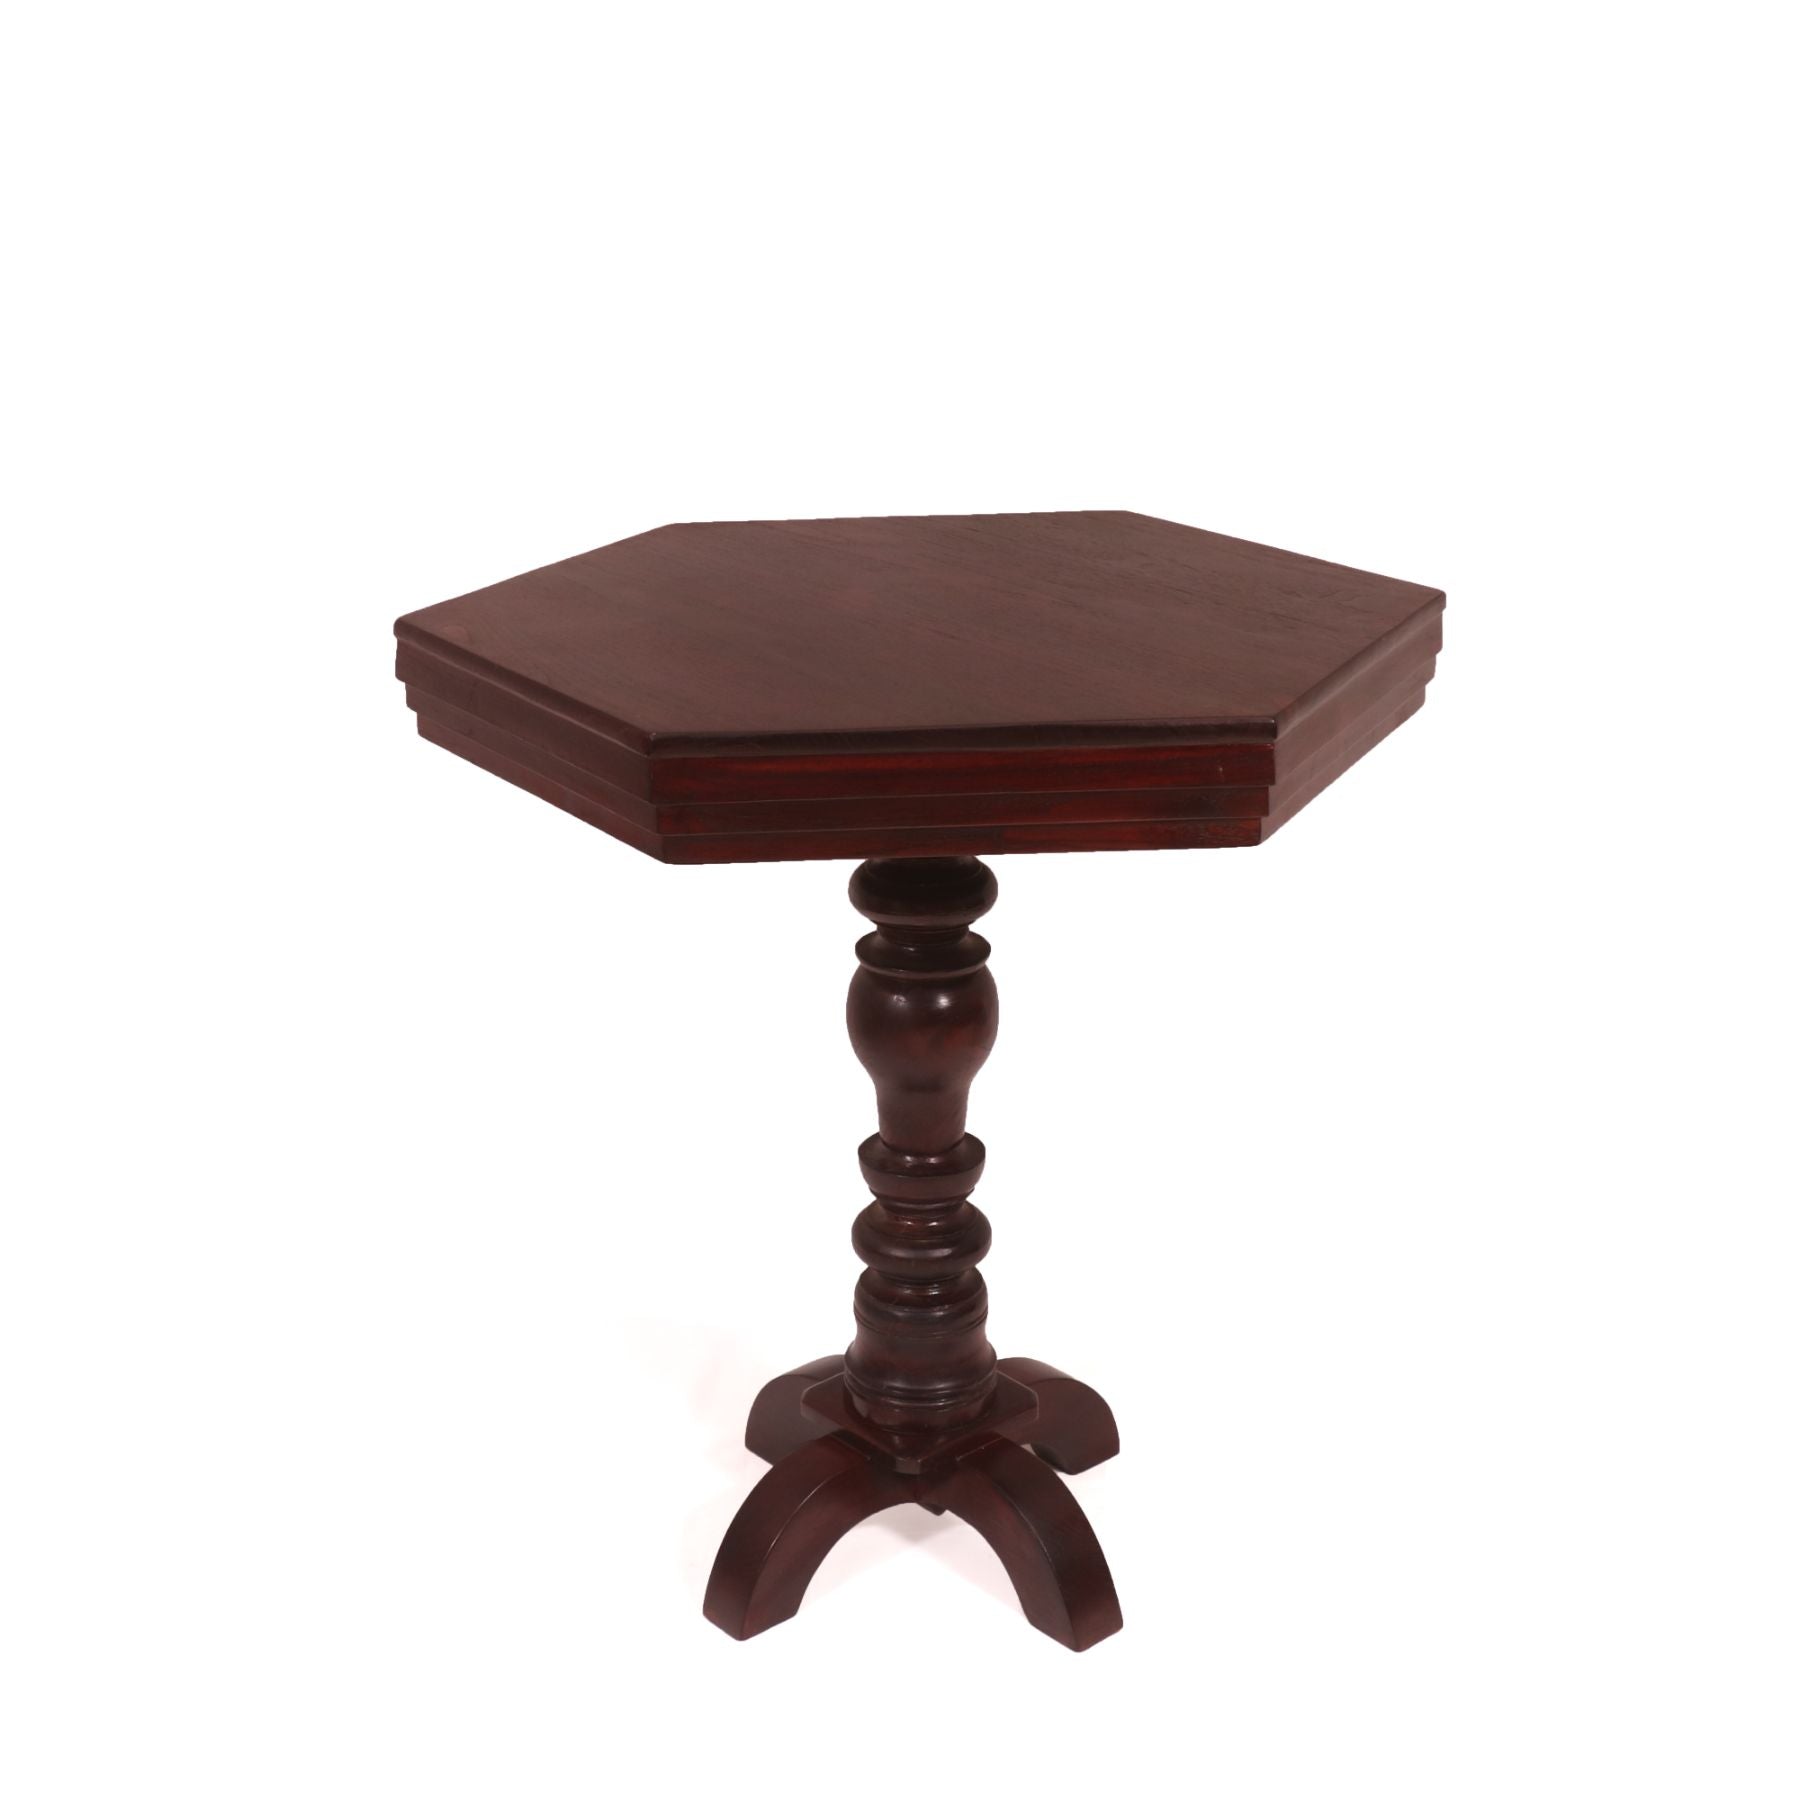 8 Angle Teak Wood Traditional Table Dining Table